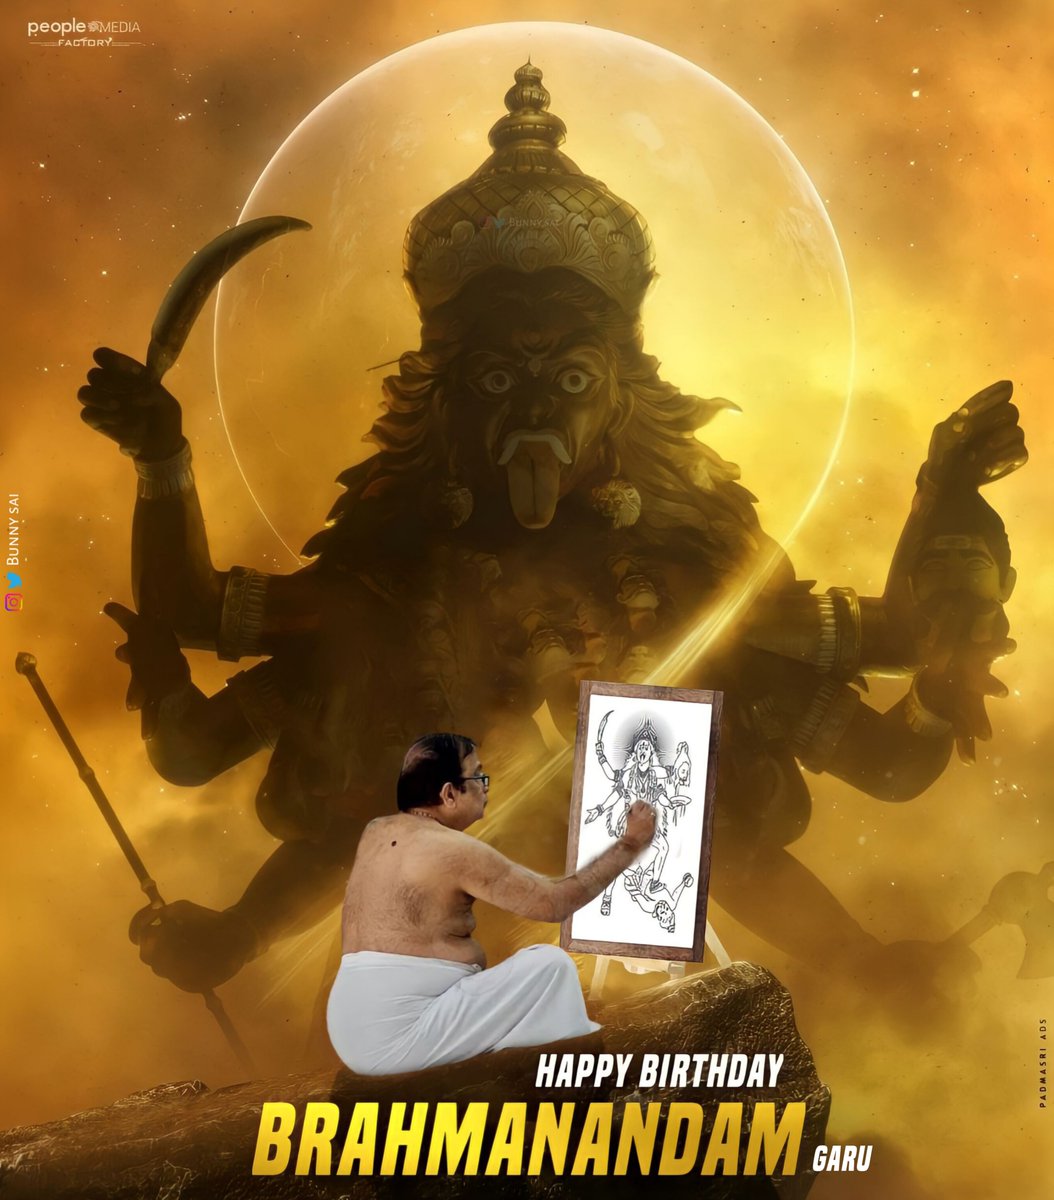 Here is the Eagle Poster ft. #Brahmanandam Version🦅

@peoplemediafcy

#HBDBrahmanandam #HappyBirthdayBrahmanandam 
#HappyBirthdayBrahmanandham